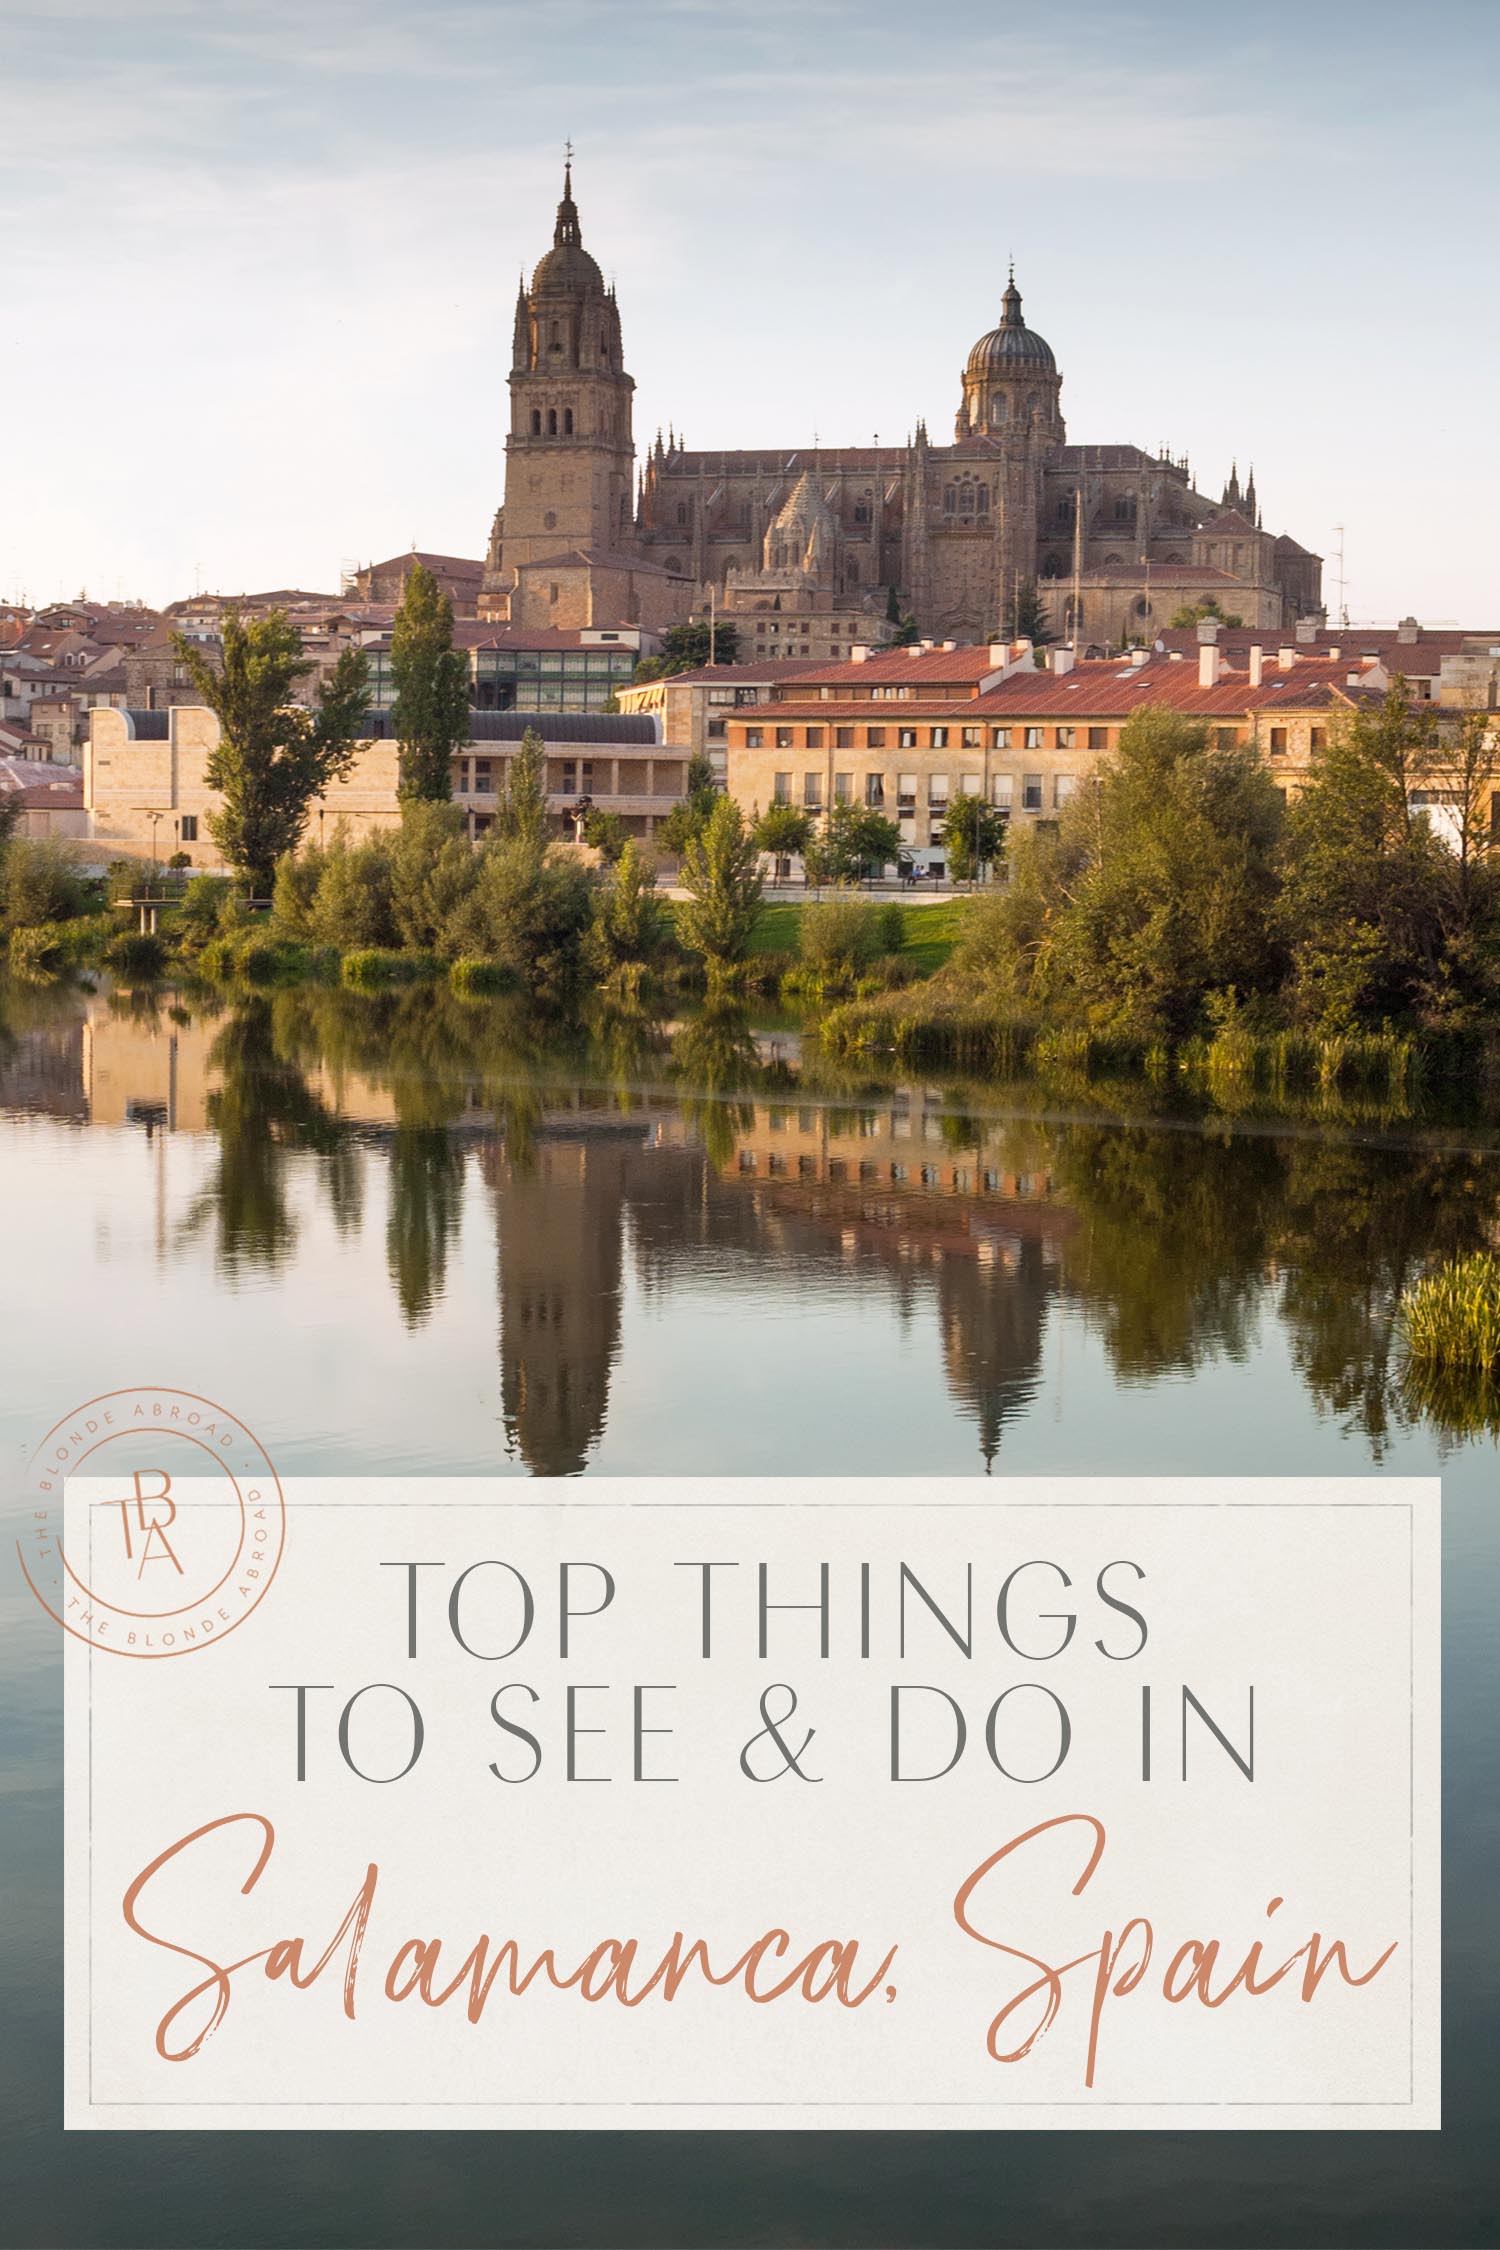 Top Things to See and Do Salamanca Spain